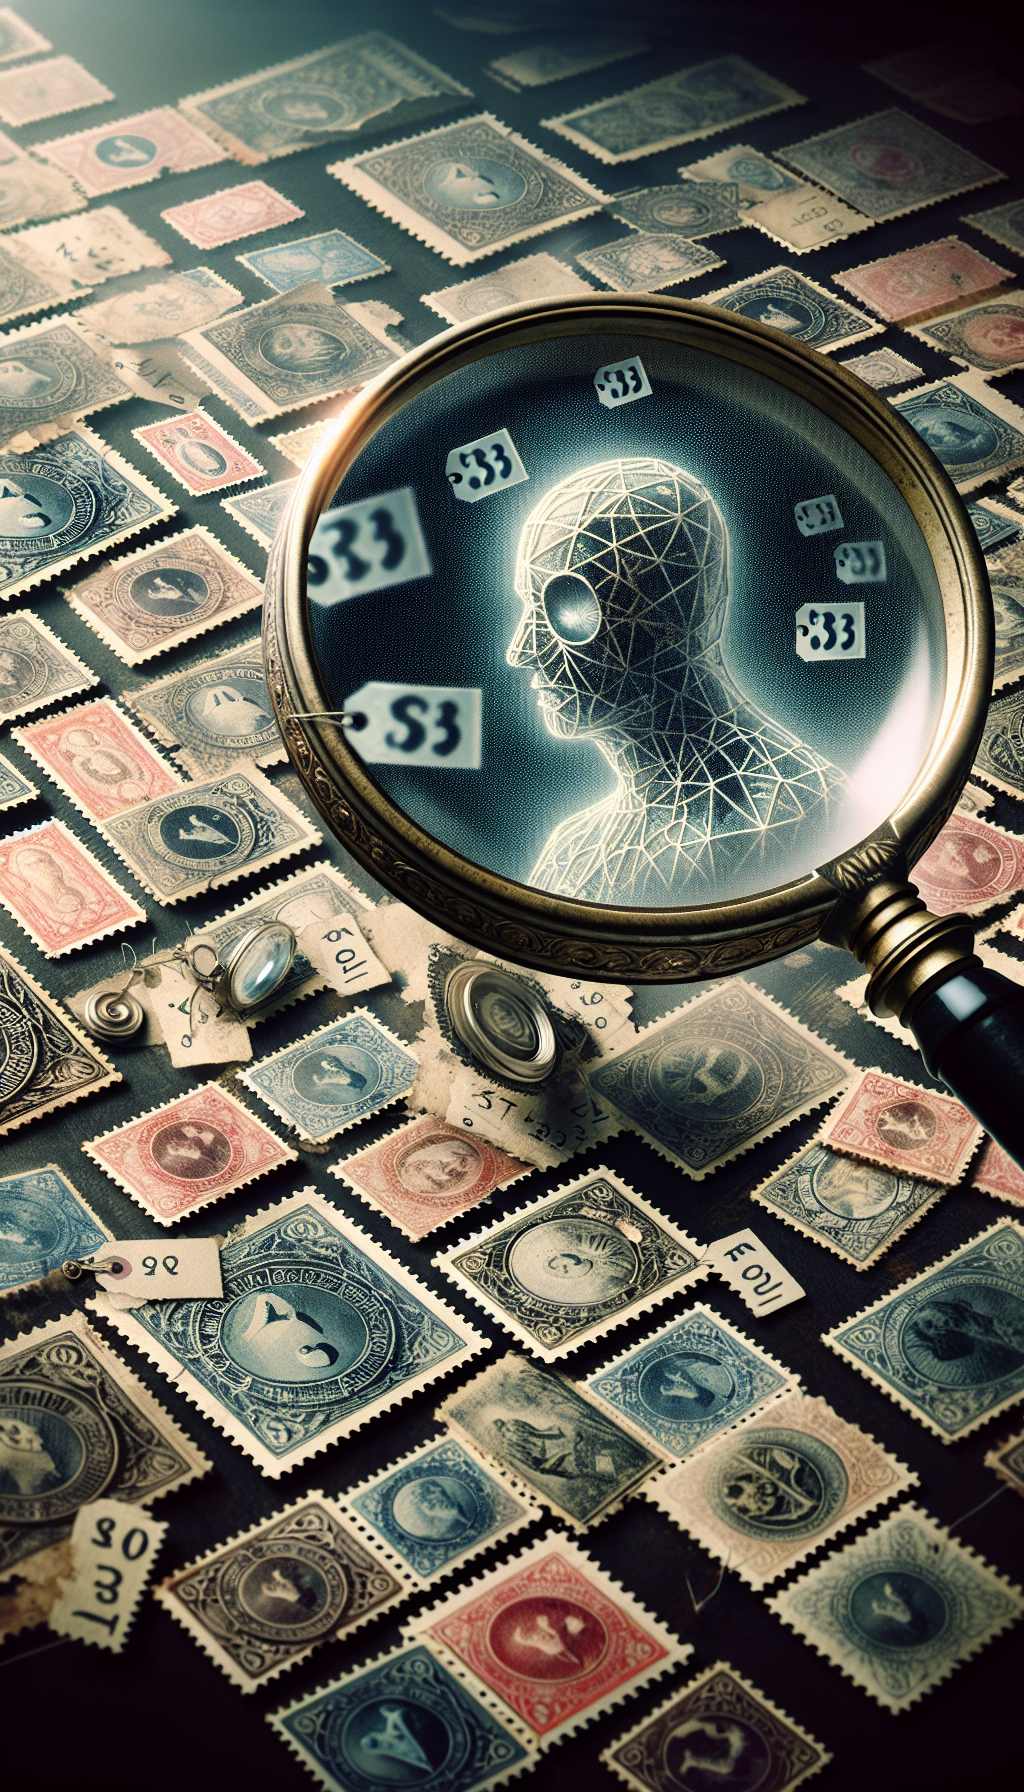 A vintage magnifying glass hovers over a collage of aged stamps with faint price tag icons shimmering on them. Intricate filigree patterns and numbers suggestive of valuations intertwine around the stamps, while a shadowy figure of an expert with a jeweler's loupe peers at the edges, symbolizing the convergence of historical allure and expert appraisal in the quest for stamp valuation secrets.